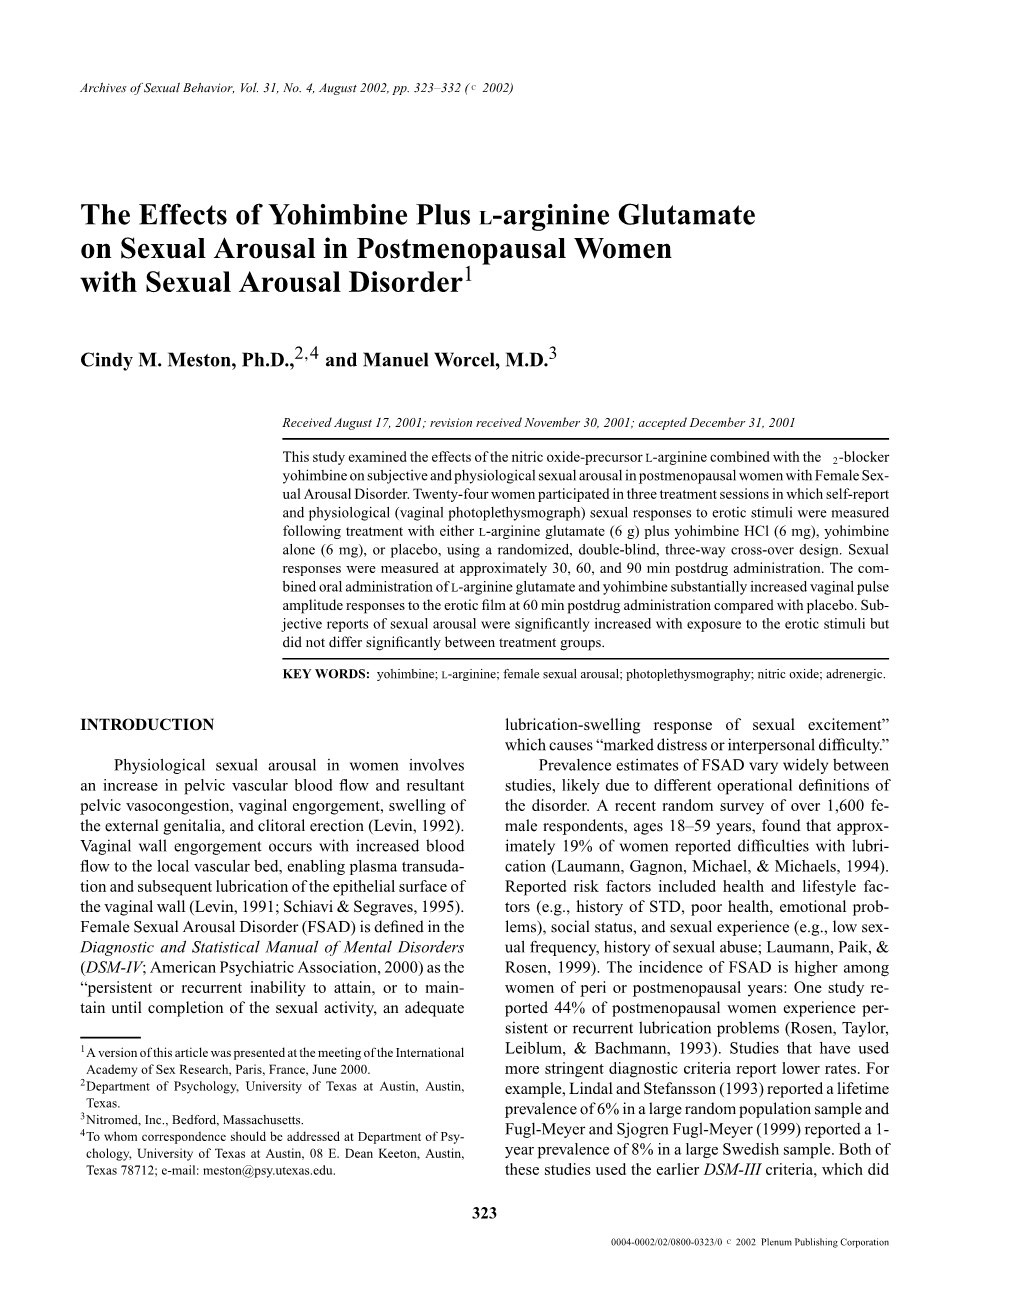 The Effects of Yohimbine Plus L-Arginine Glutamate on Sexual Arousal in Postmenopausal Women with Sexual Arousal Disorder1